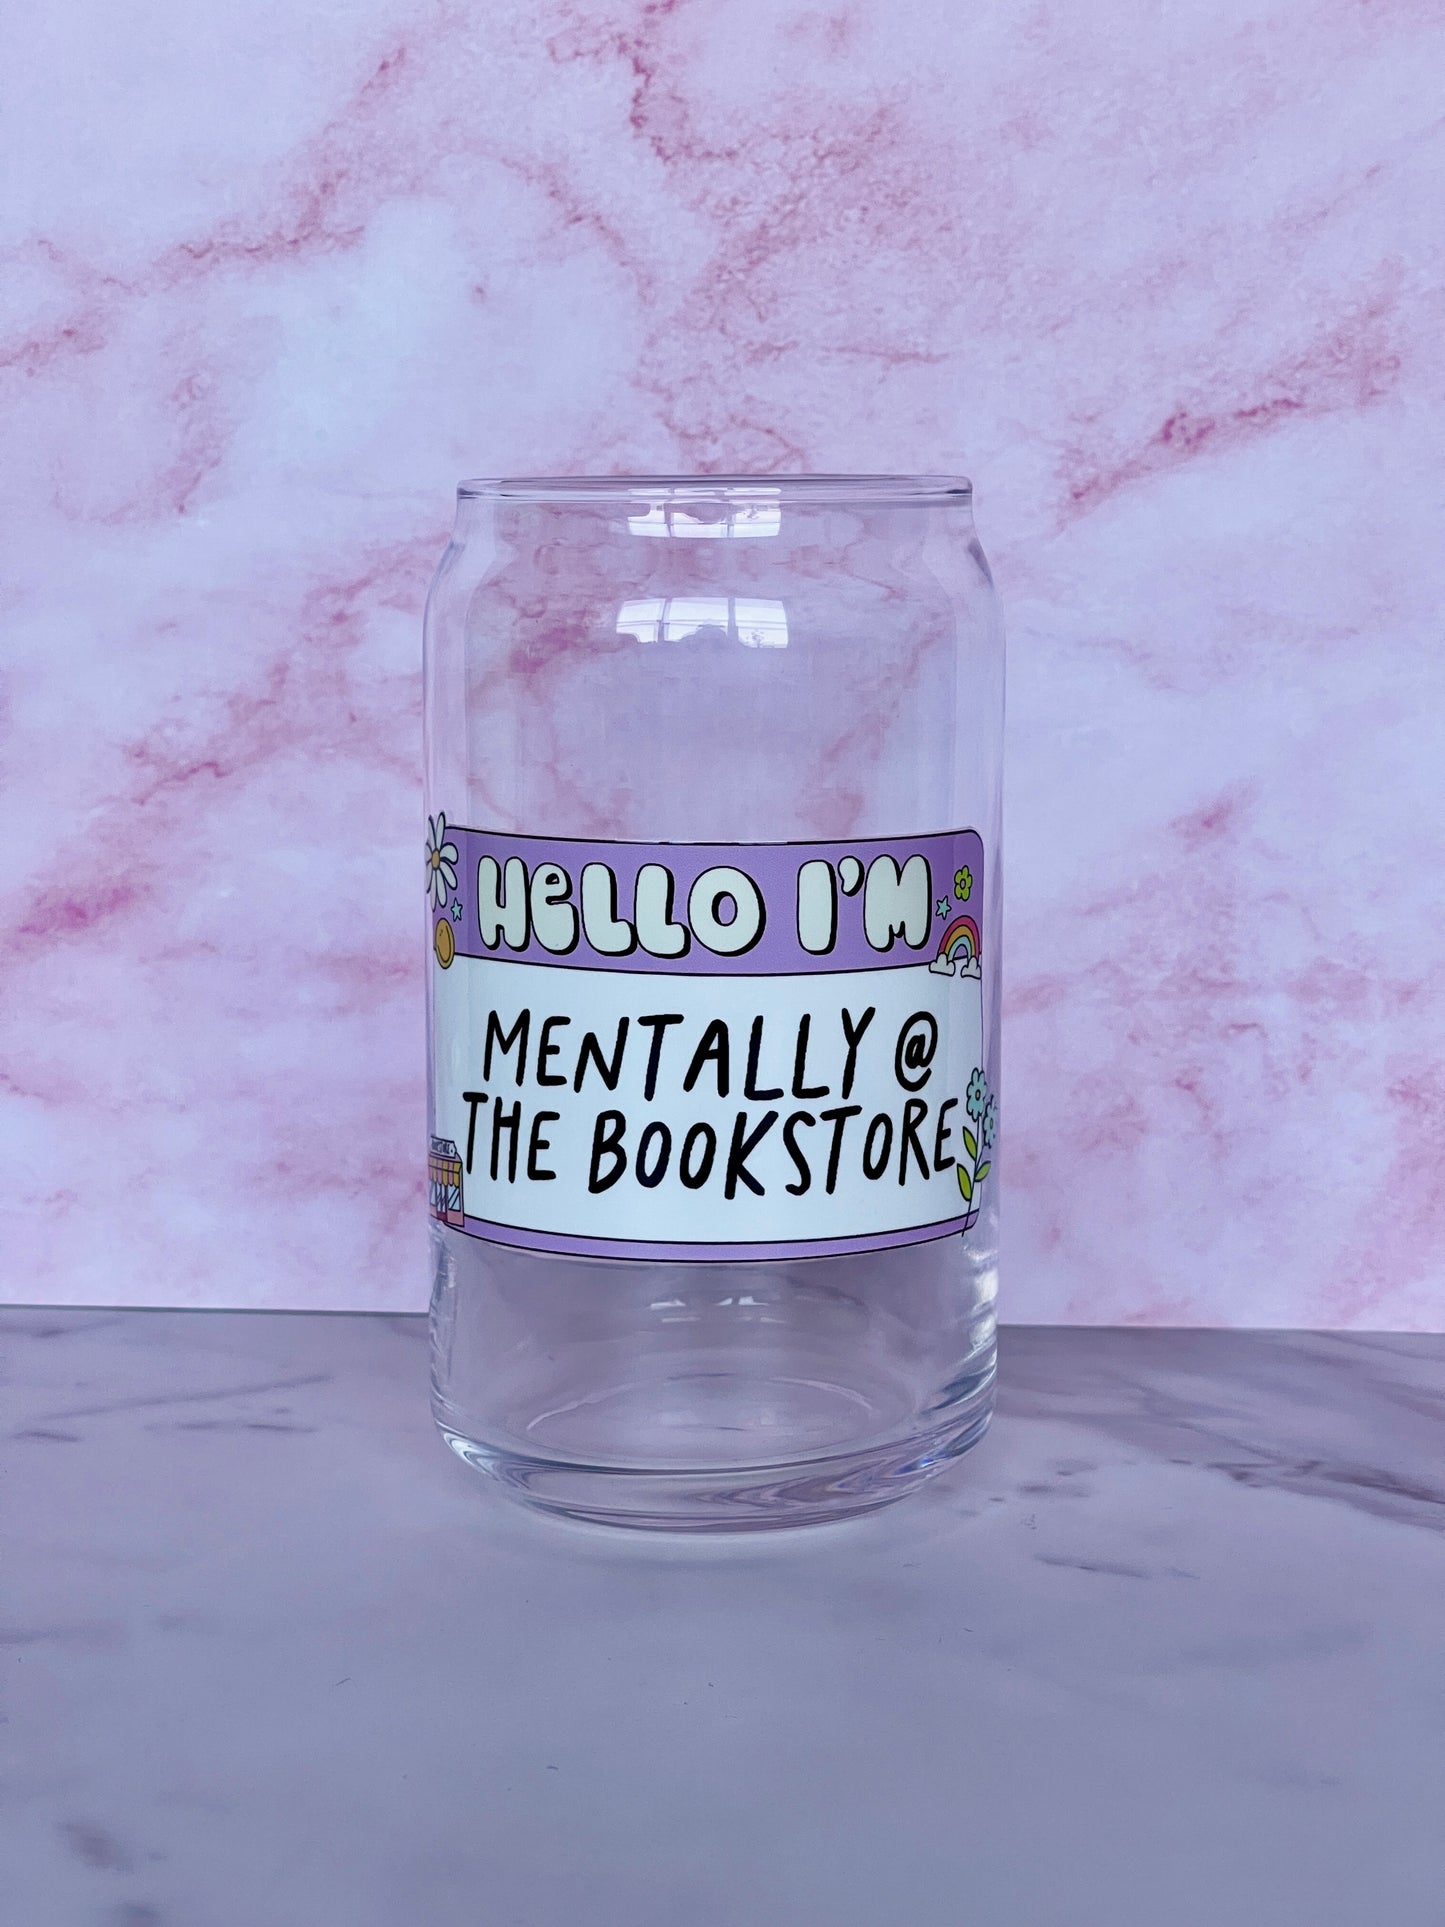 Mentally @ The Bookstore Glass Cup